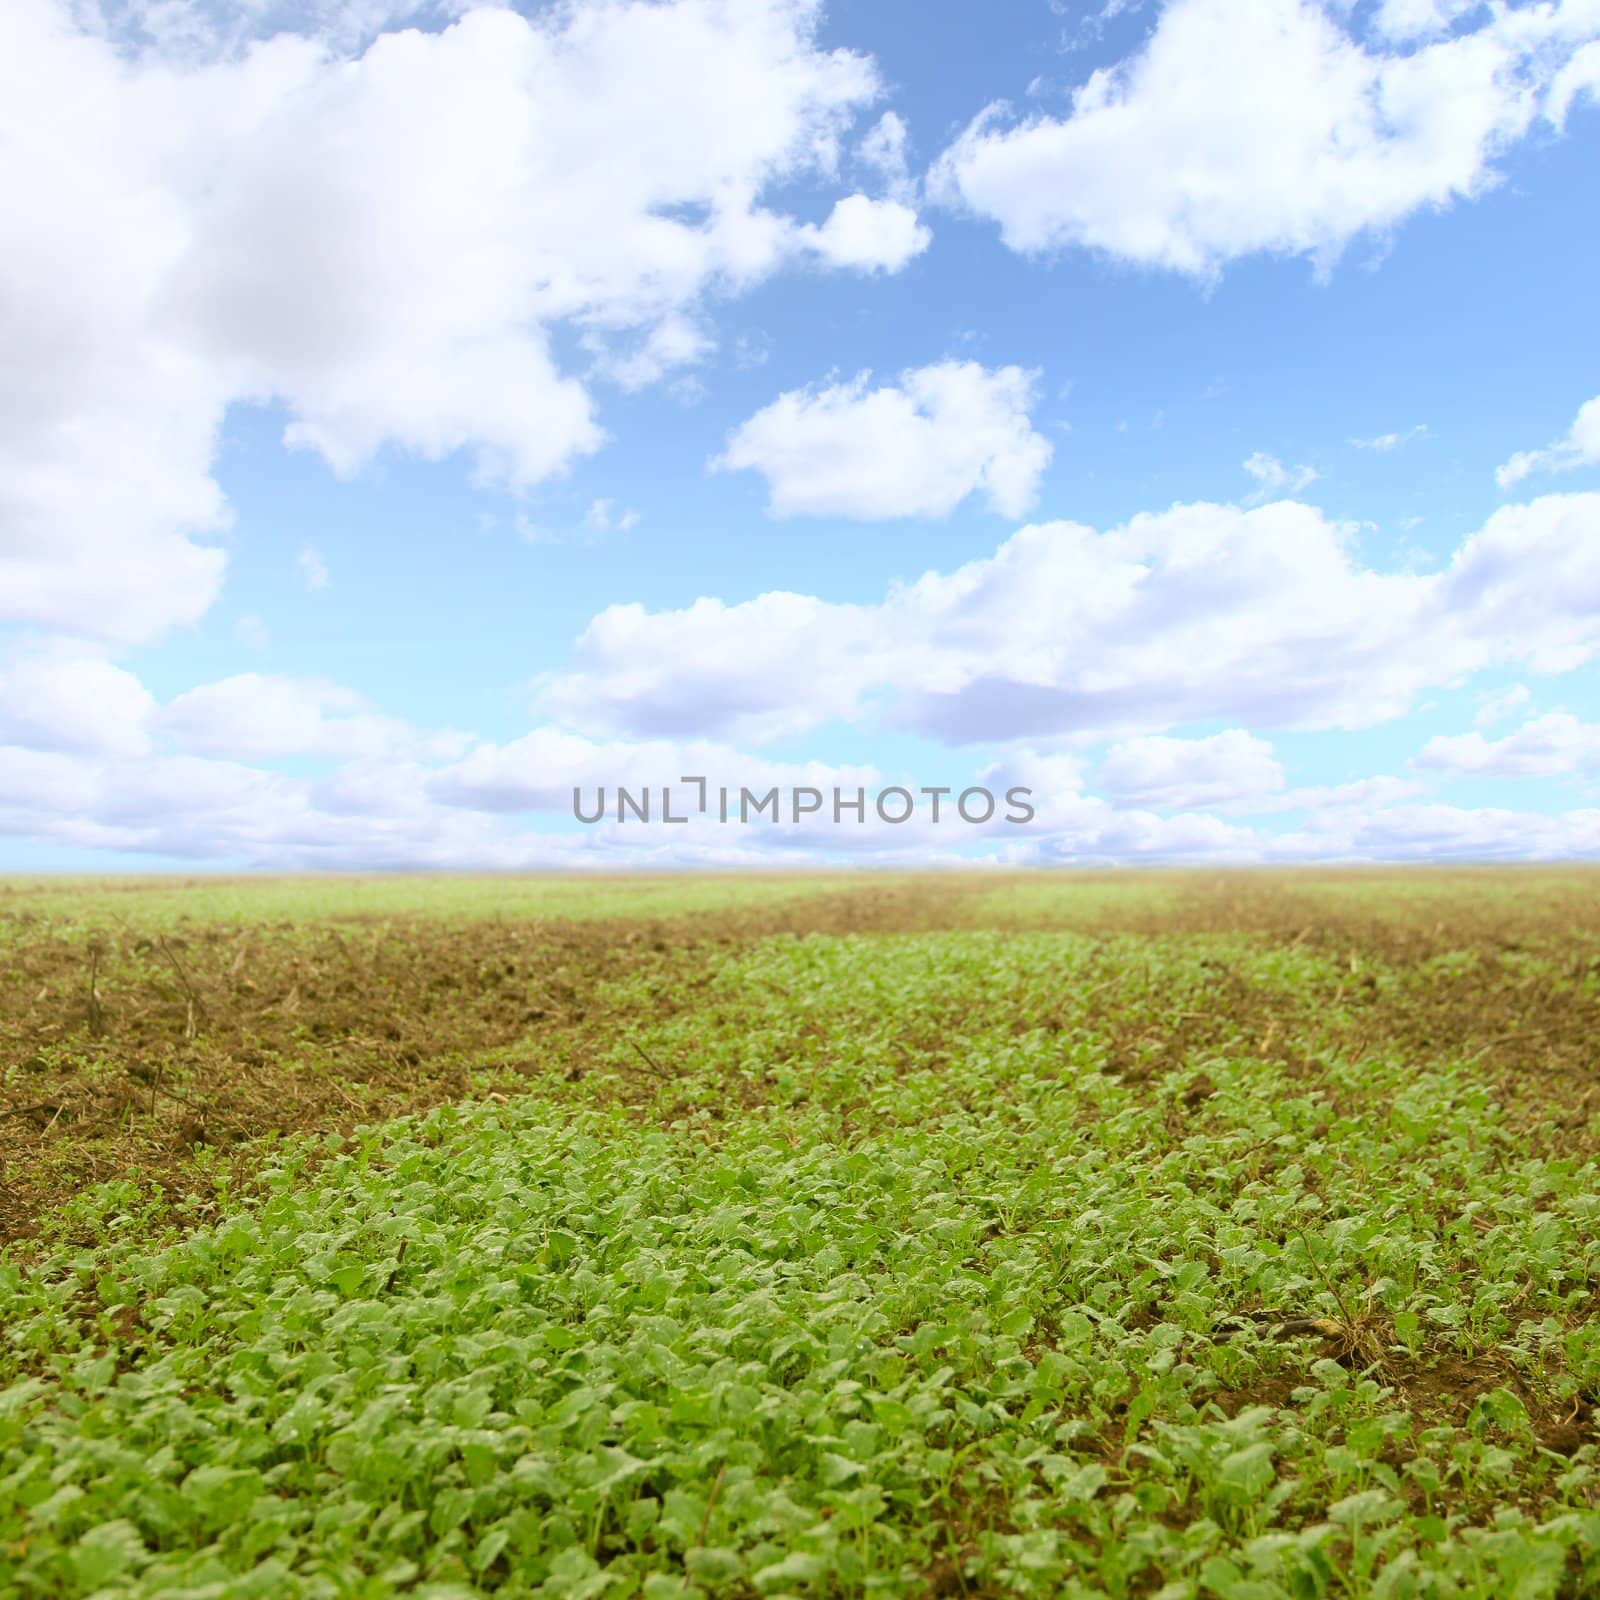 Field with small seedlings  under blue sky